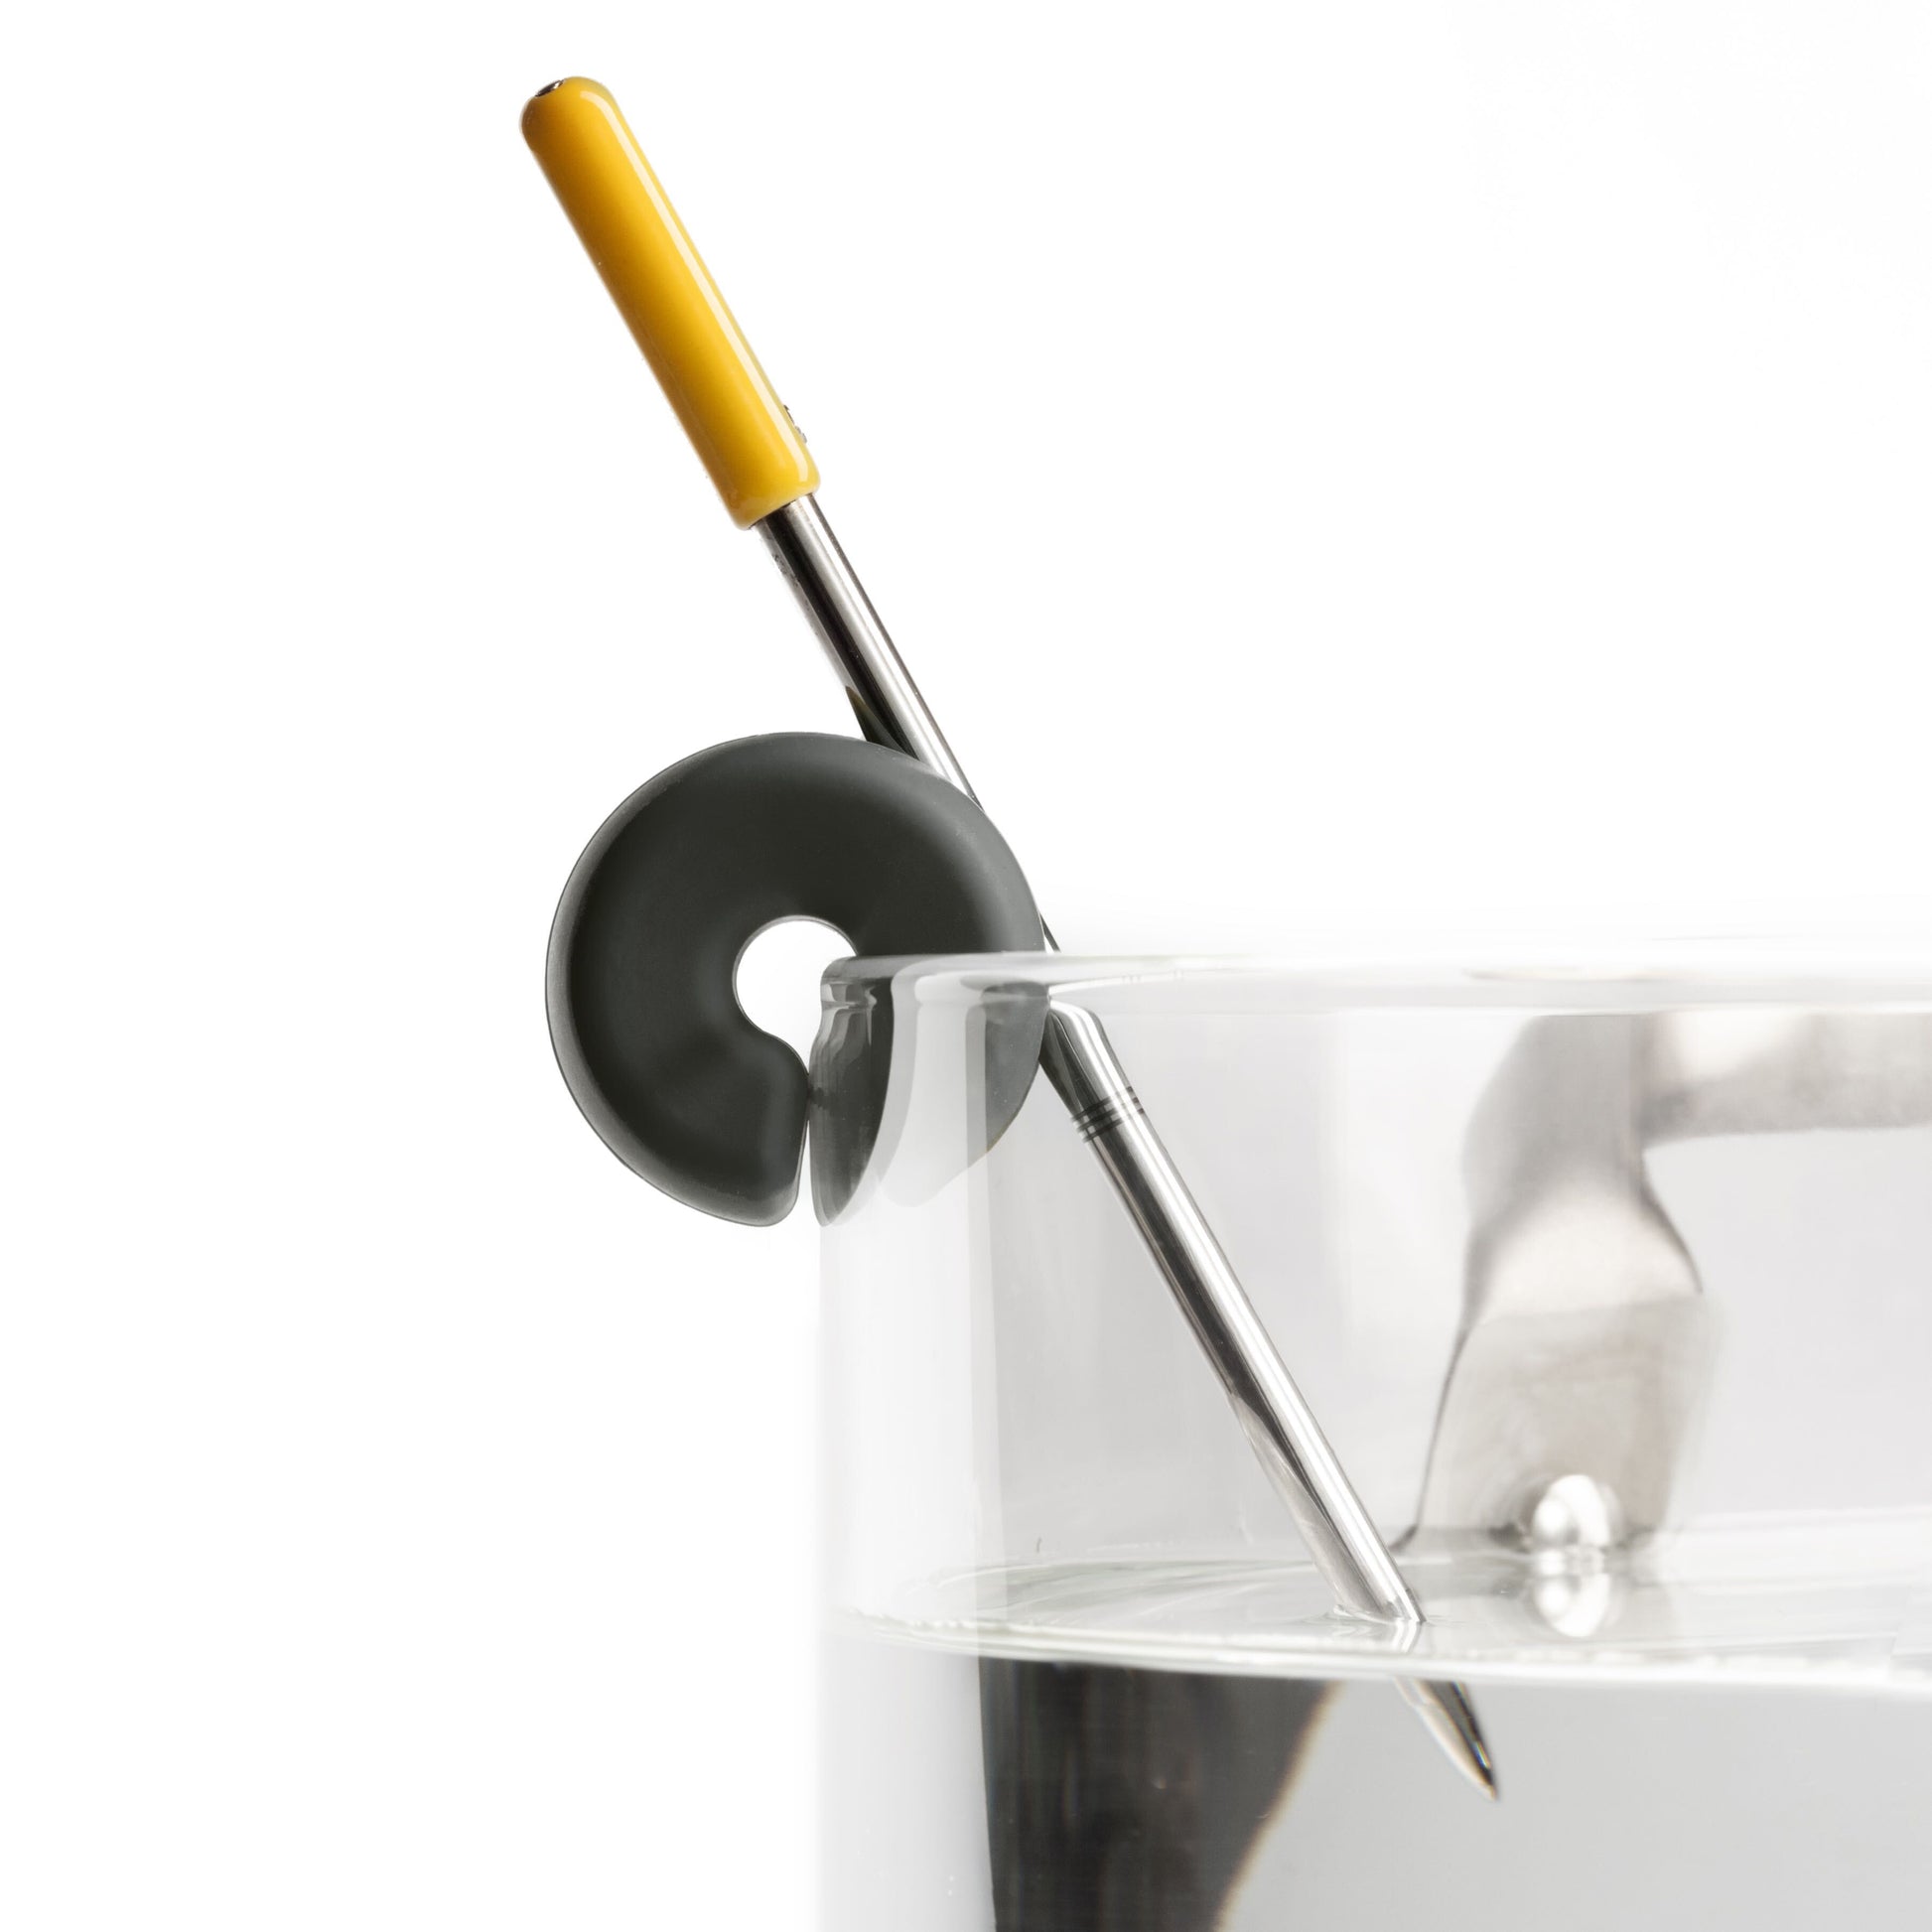 Combustion Pot Clip (black) holding a Predictive Thermometer on the edge of a transparent glass pot.